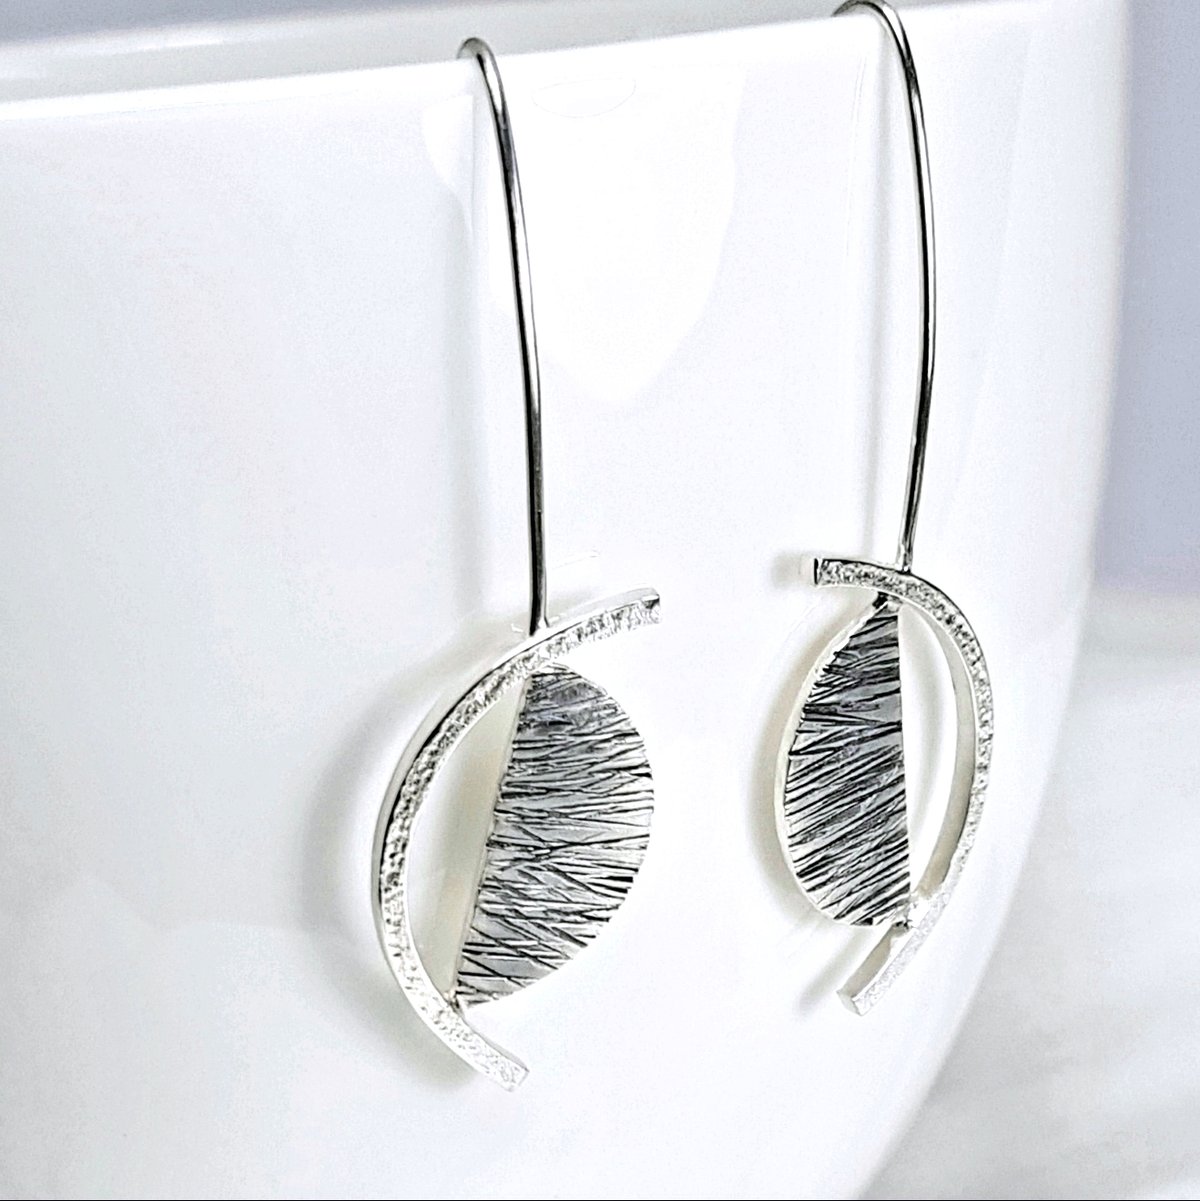 Image of Contemporary Sterling Silver Earrings, Handmade Geometrical Earrings, Recycled Silver